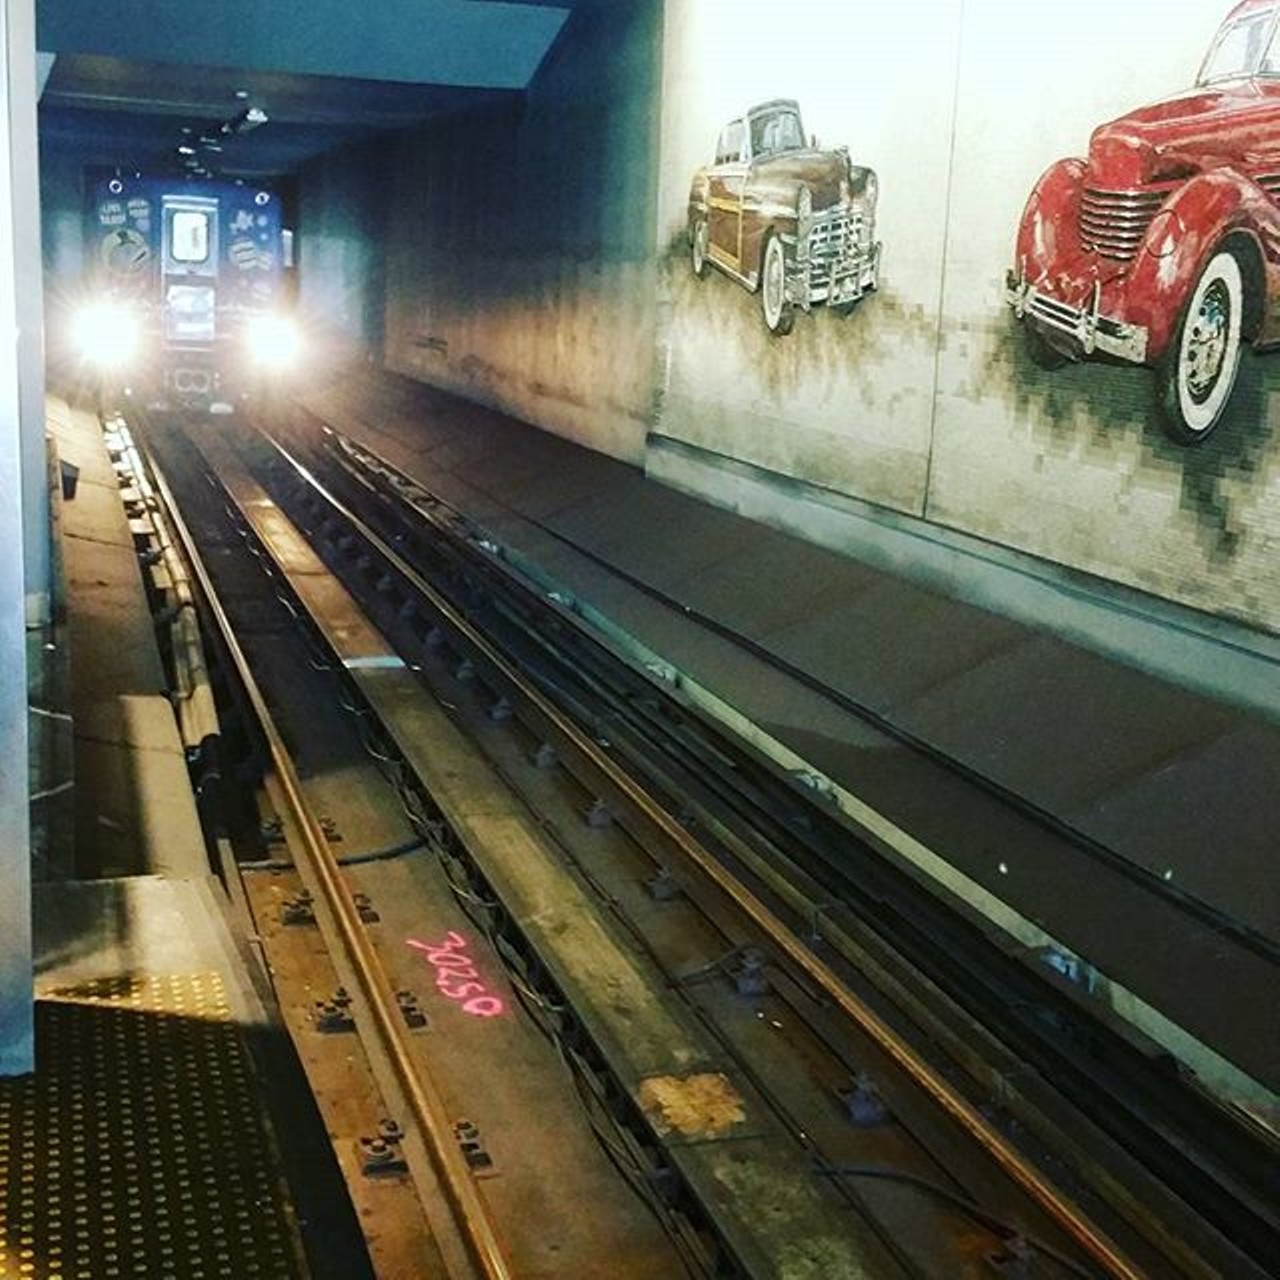 The obligatory pulling-into-the-station shot that only cool people do. (Photo via Instagram, @jboogie23)